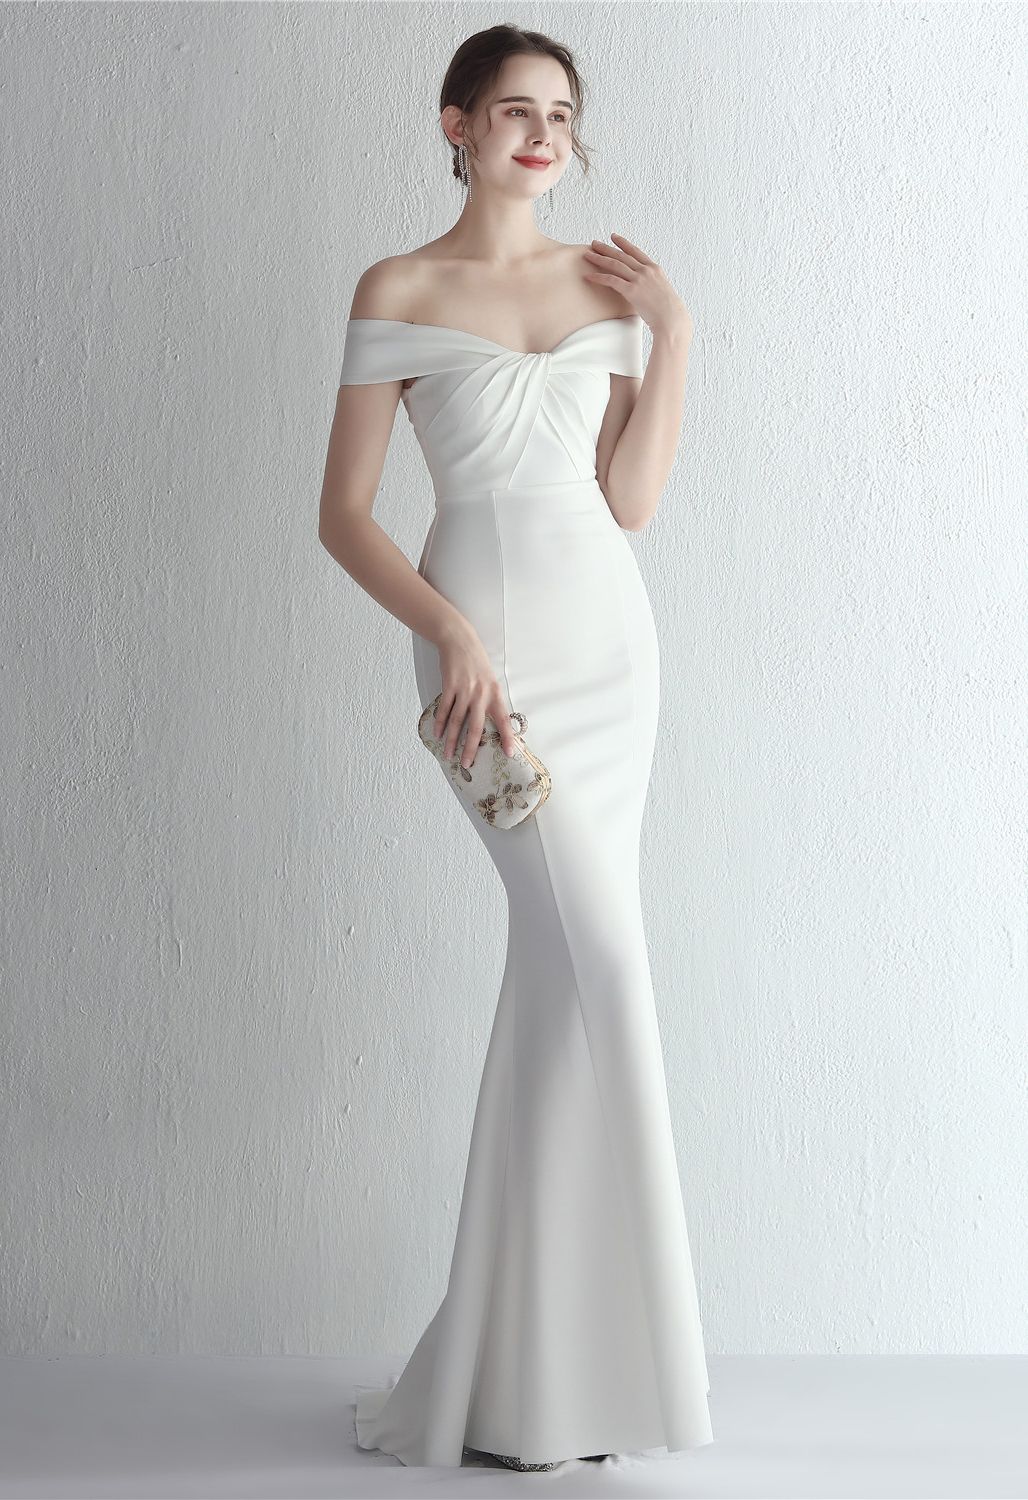 Twist Front Off-Shoulder Gown in White - Retro, Indie and Unique Fashion